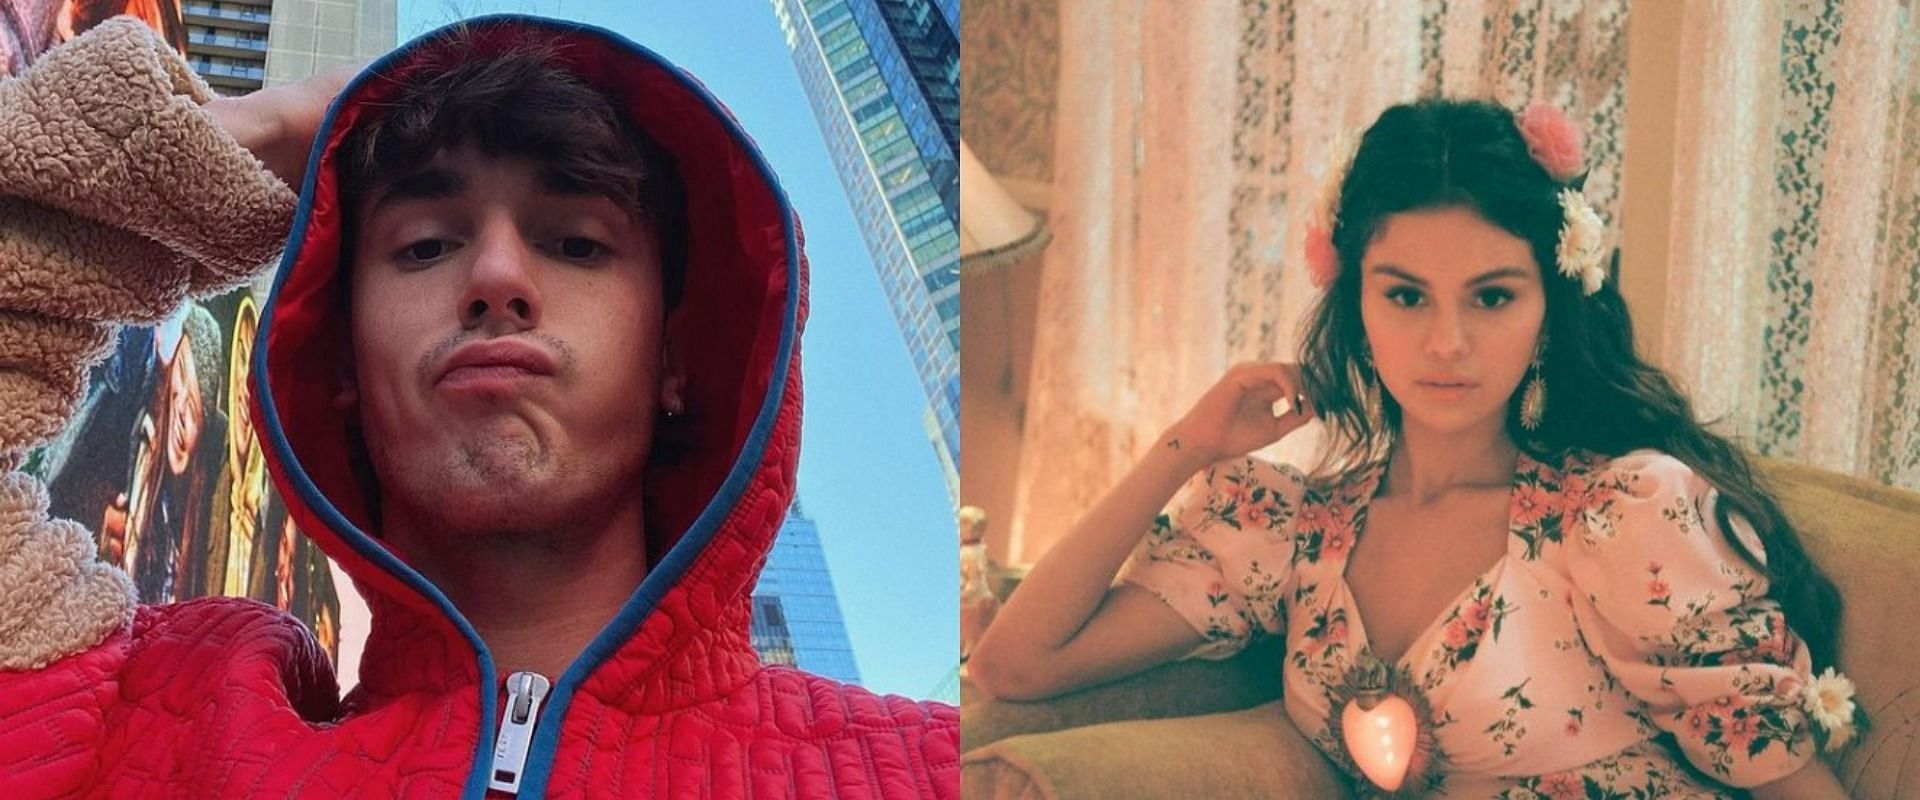 Bryce Hall dragged online for using Selena Gomez for publicity (Image via brycehall and selenagomez/ Instagram)